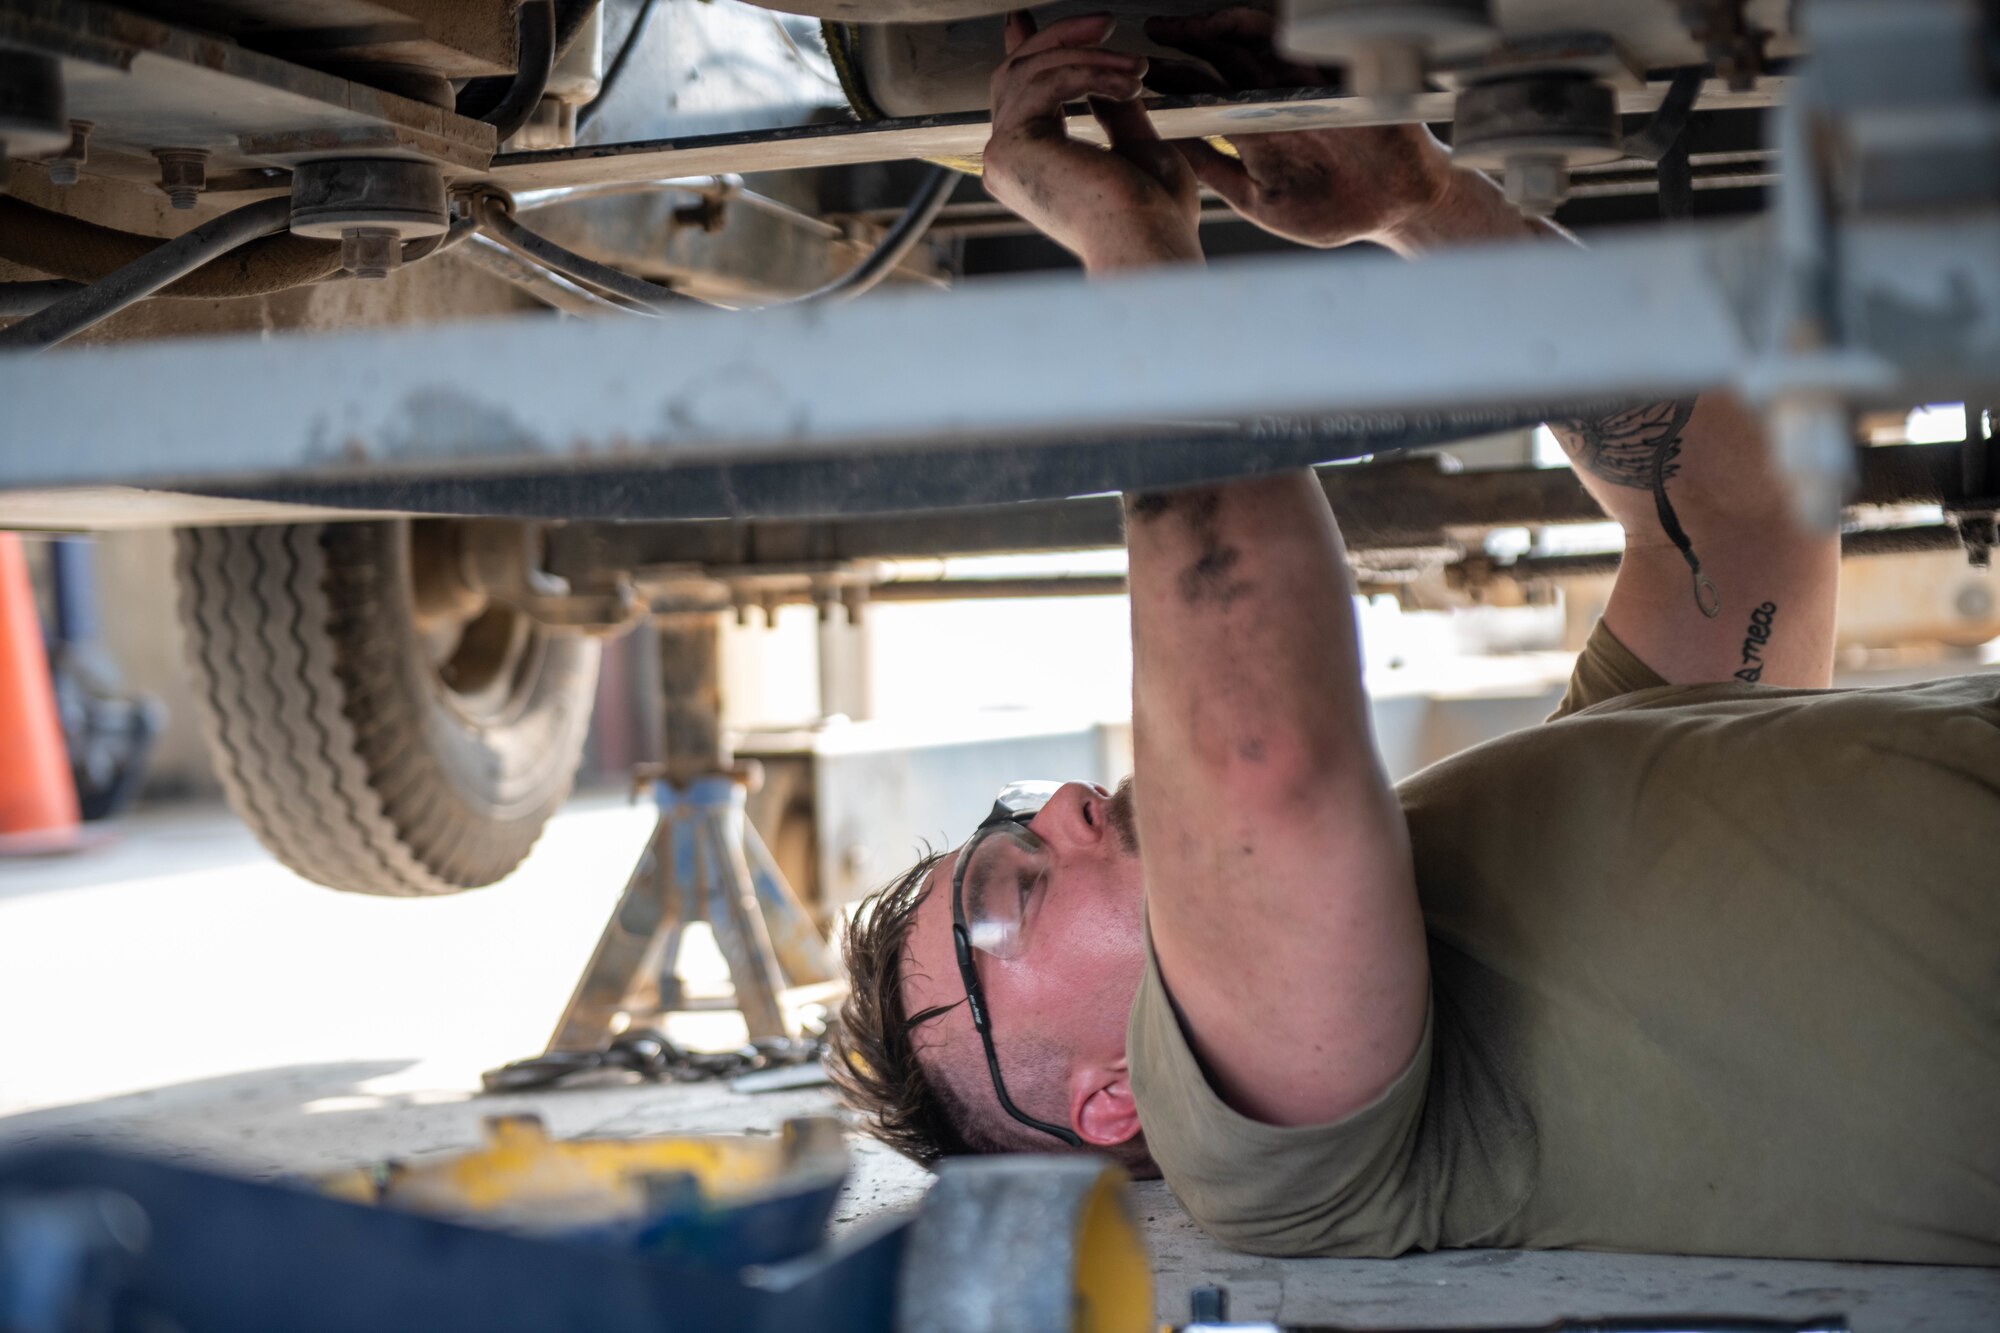 U.S. Air Force Airman 1st Class Cameron Waters, 379th Air Expeditionary Wing Aerospace Ground Equipment Specialist, loosens bolts on the underside of a generator motor on Al Udeid Air Base, Qatar, June 9, 2022. Equipment such as jack stands and tire chalks are used to secure the machinery in place during maintenance. (U.S. Air National Guard photo by Airman 1st Class Constantine Bambakidis)